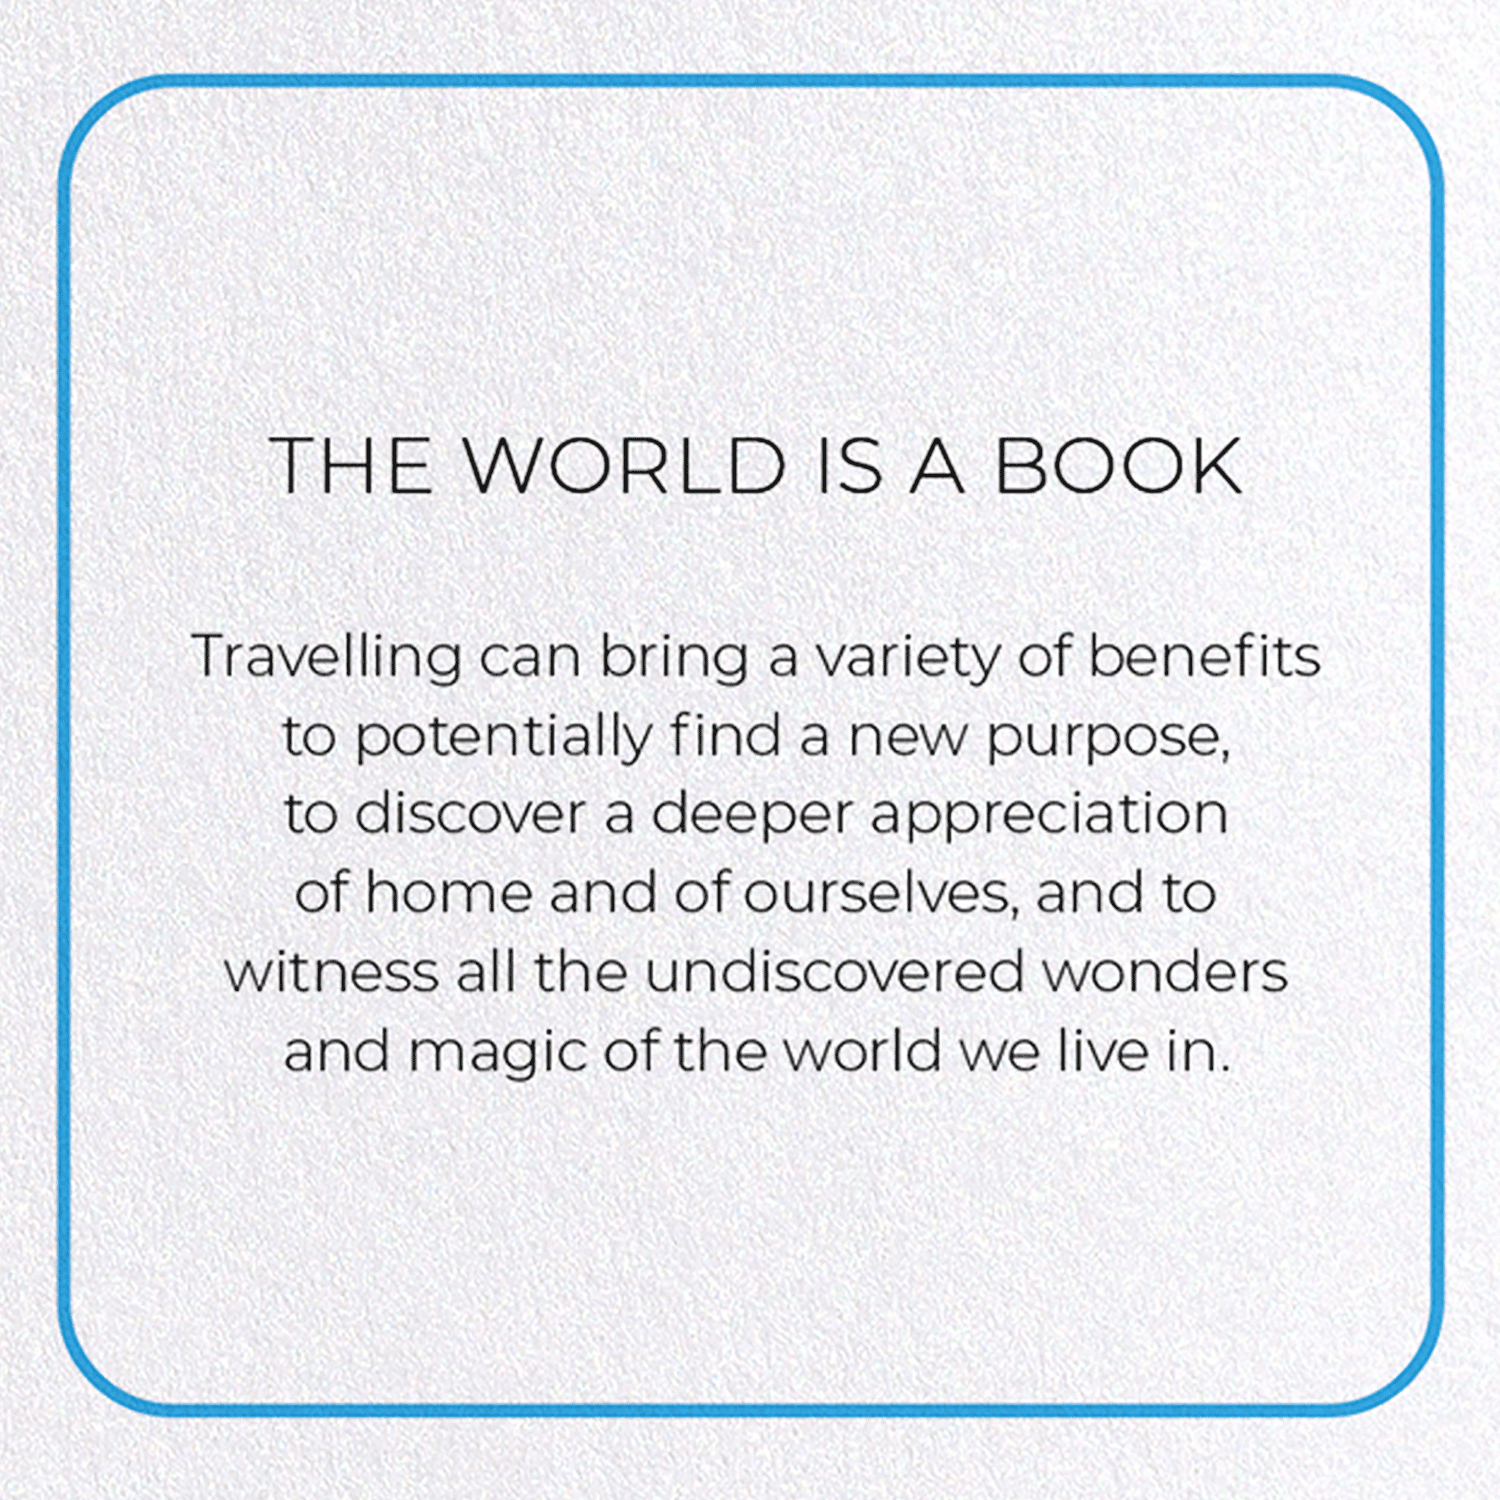 THE WORLD IS A BOOK: Photo Greeting Card